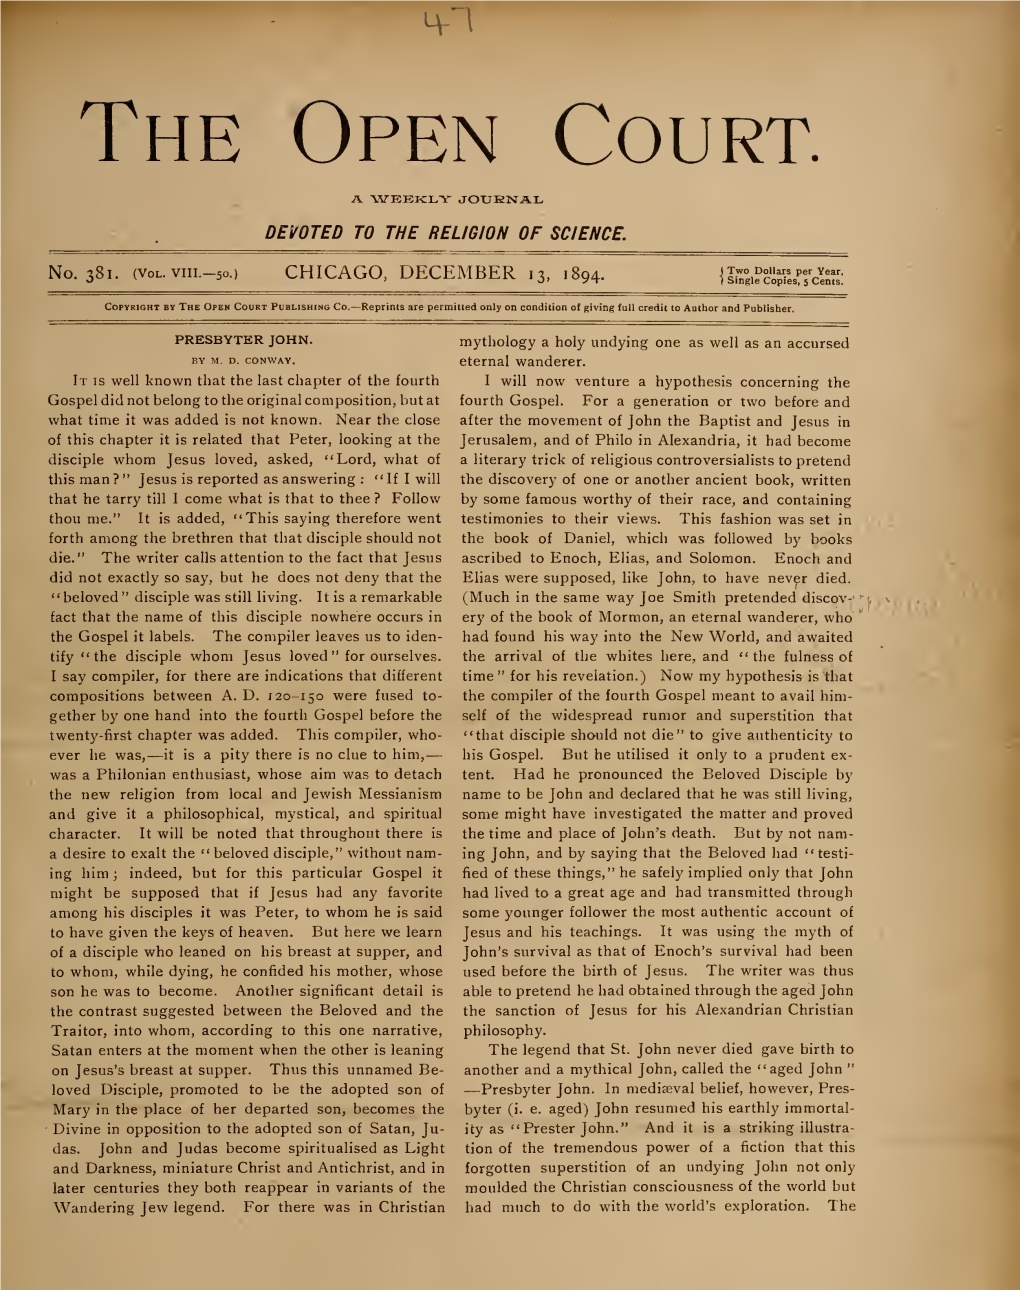 The Open Court. a "WEEKLY JOUENAL